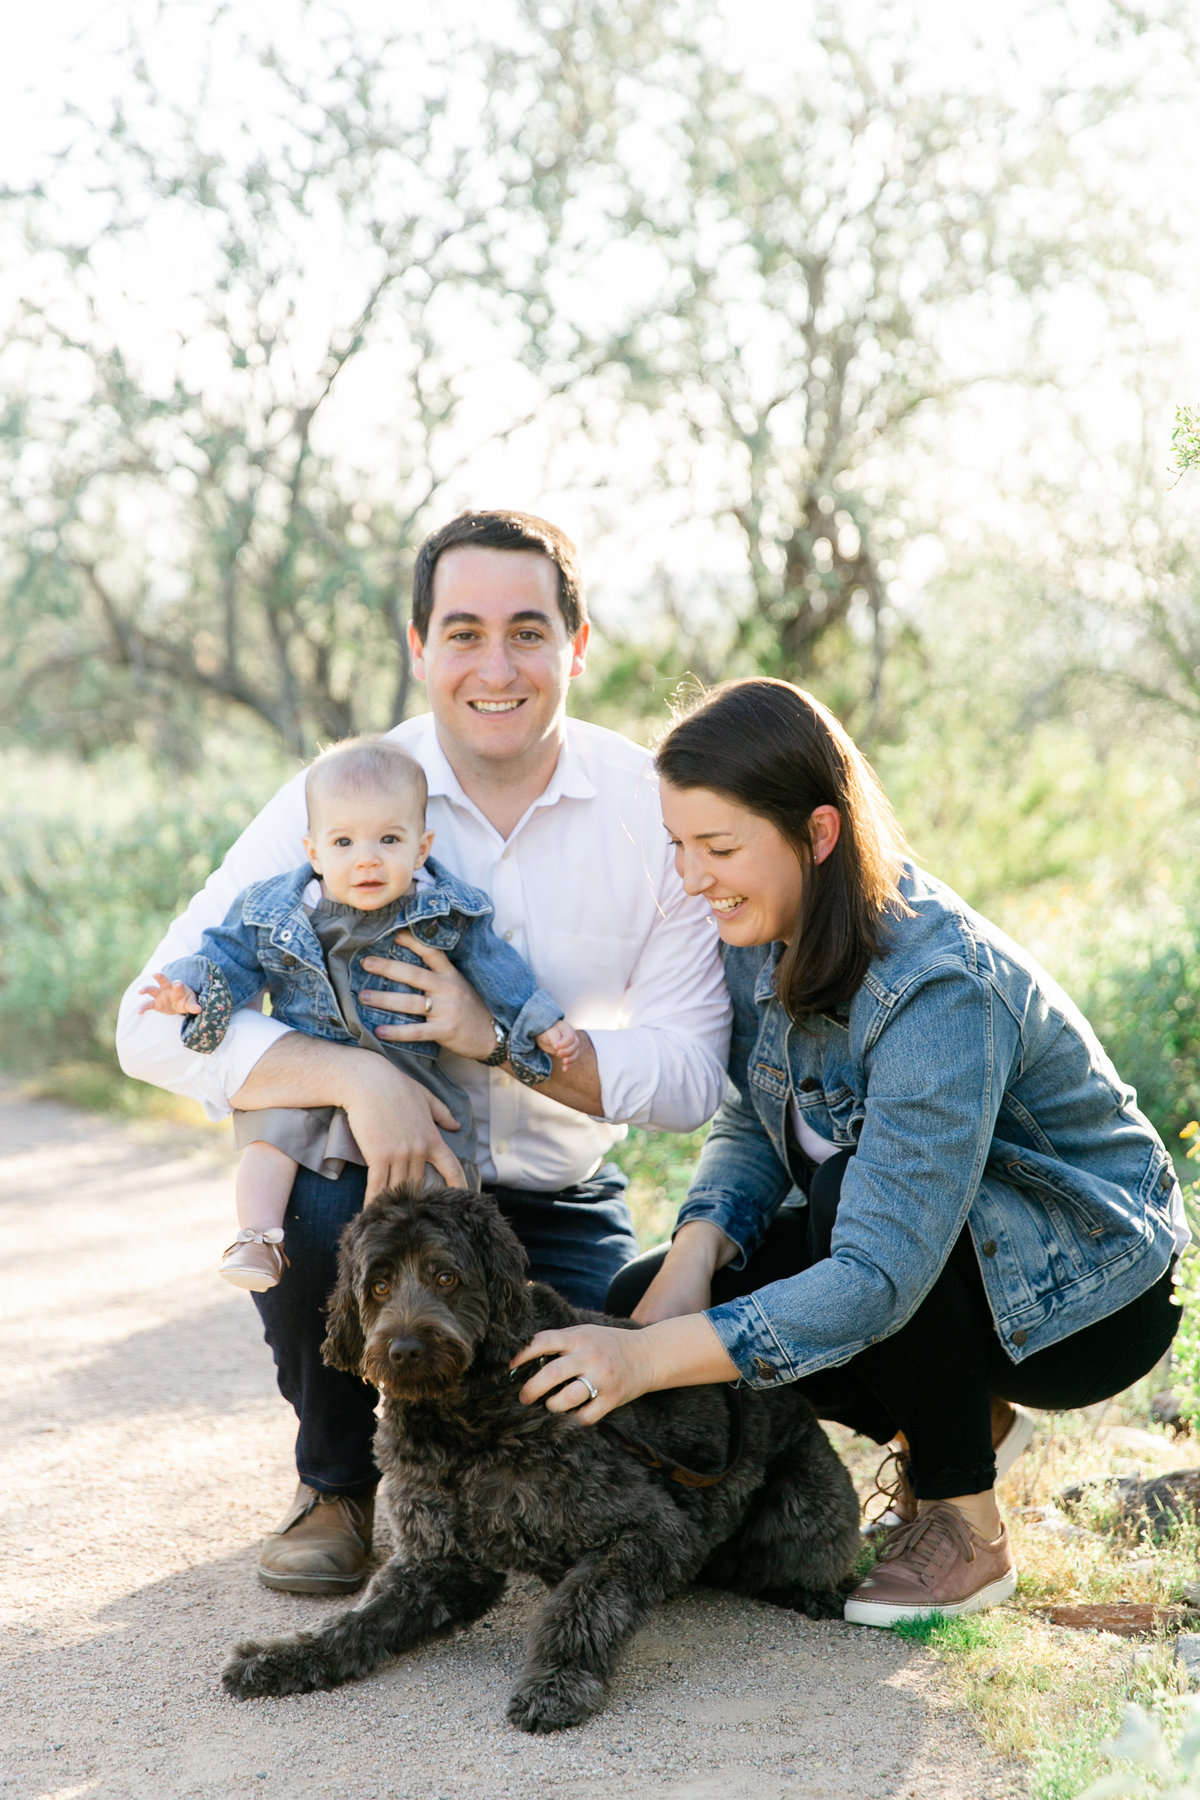 Karlie Colleen Photography - Scottsdale family photography - Victoria & family-17